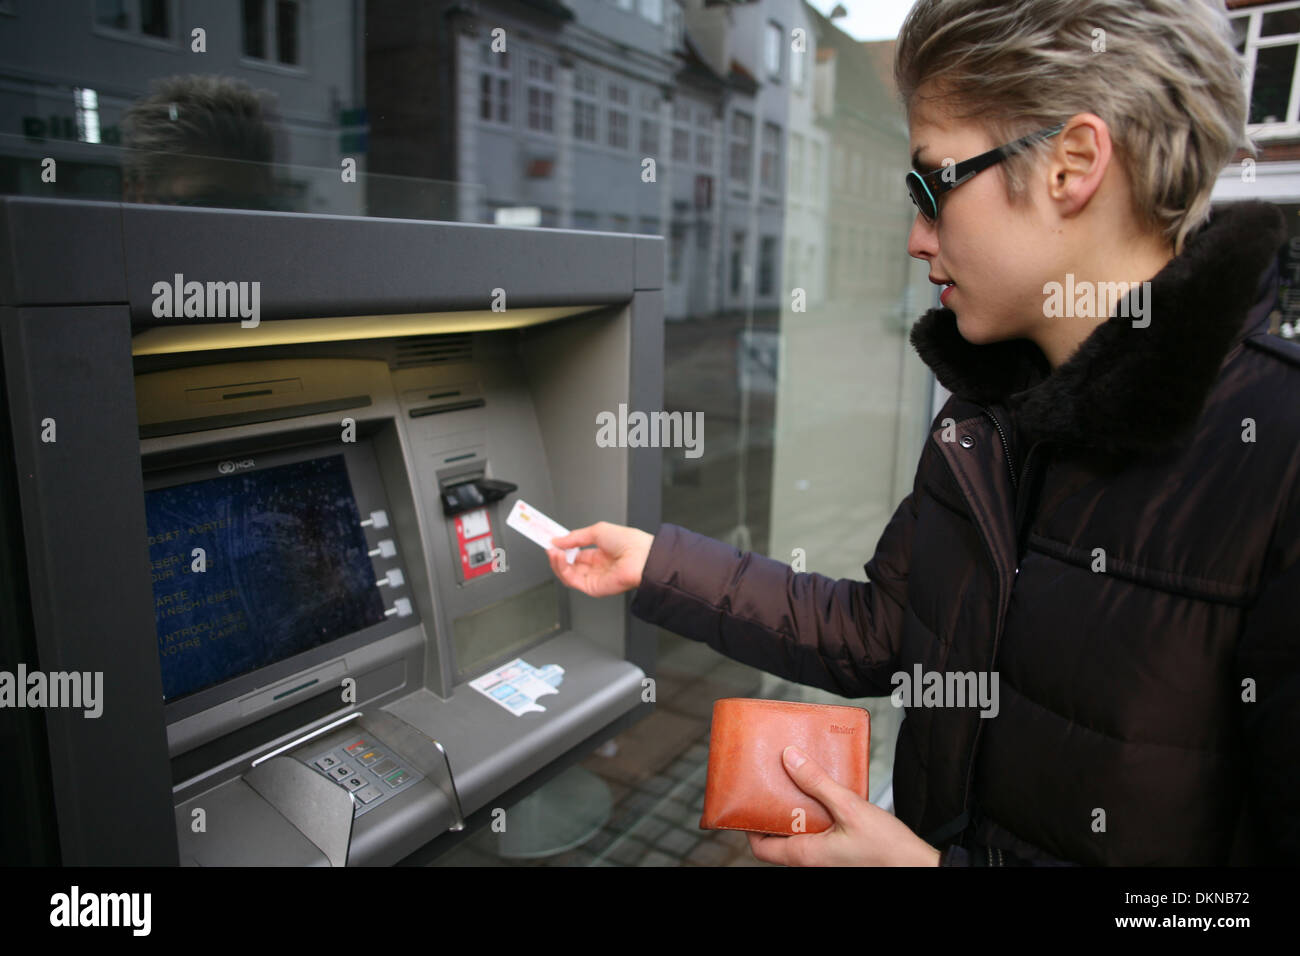 pretty woman outdoor taking cash from an atm machime Stock Photo